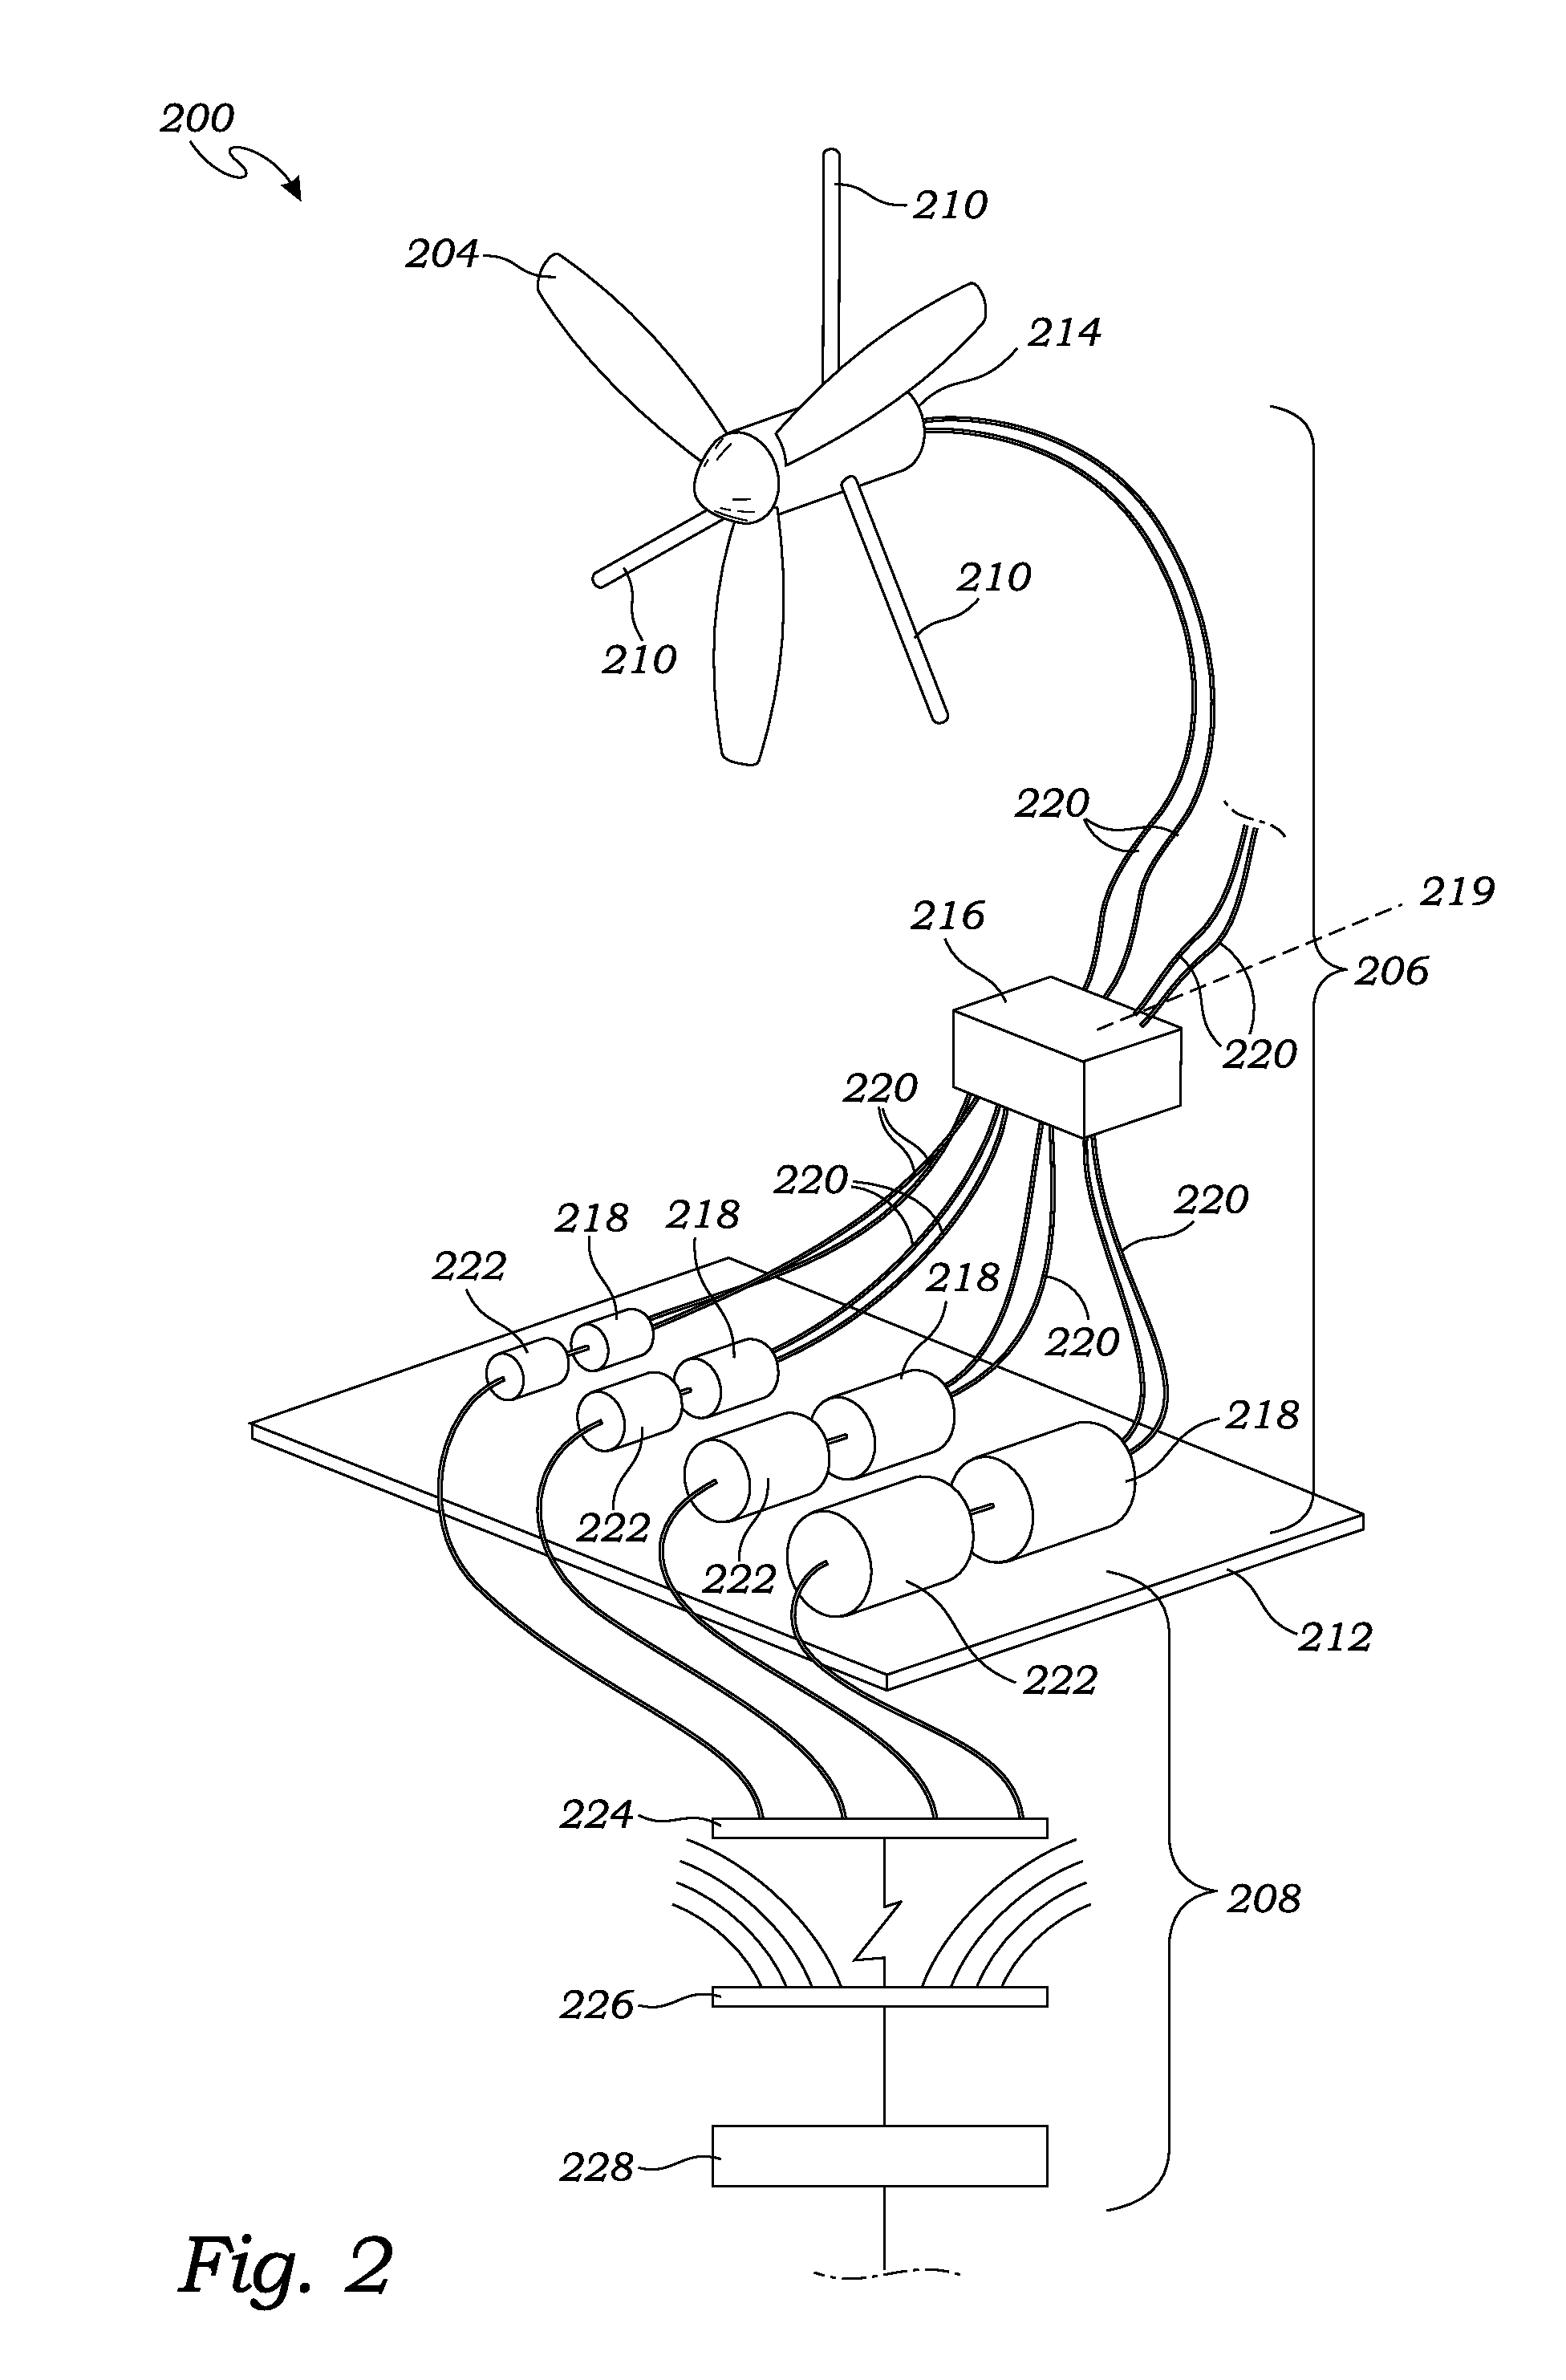 Method for erecting a facility producing electrical energy from wind